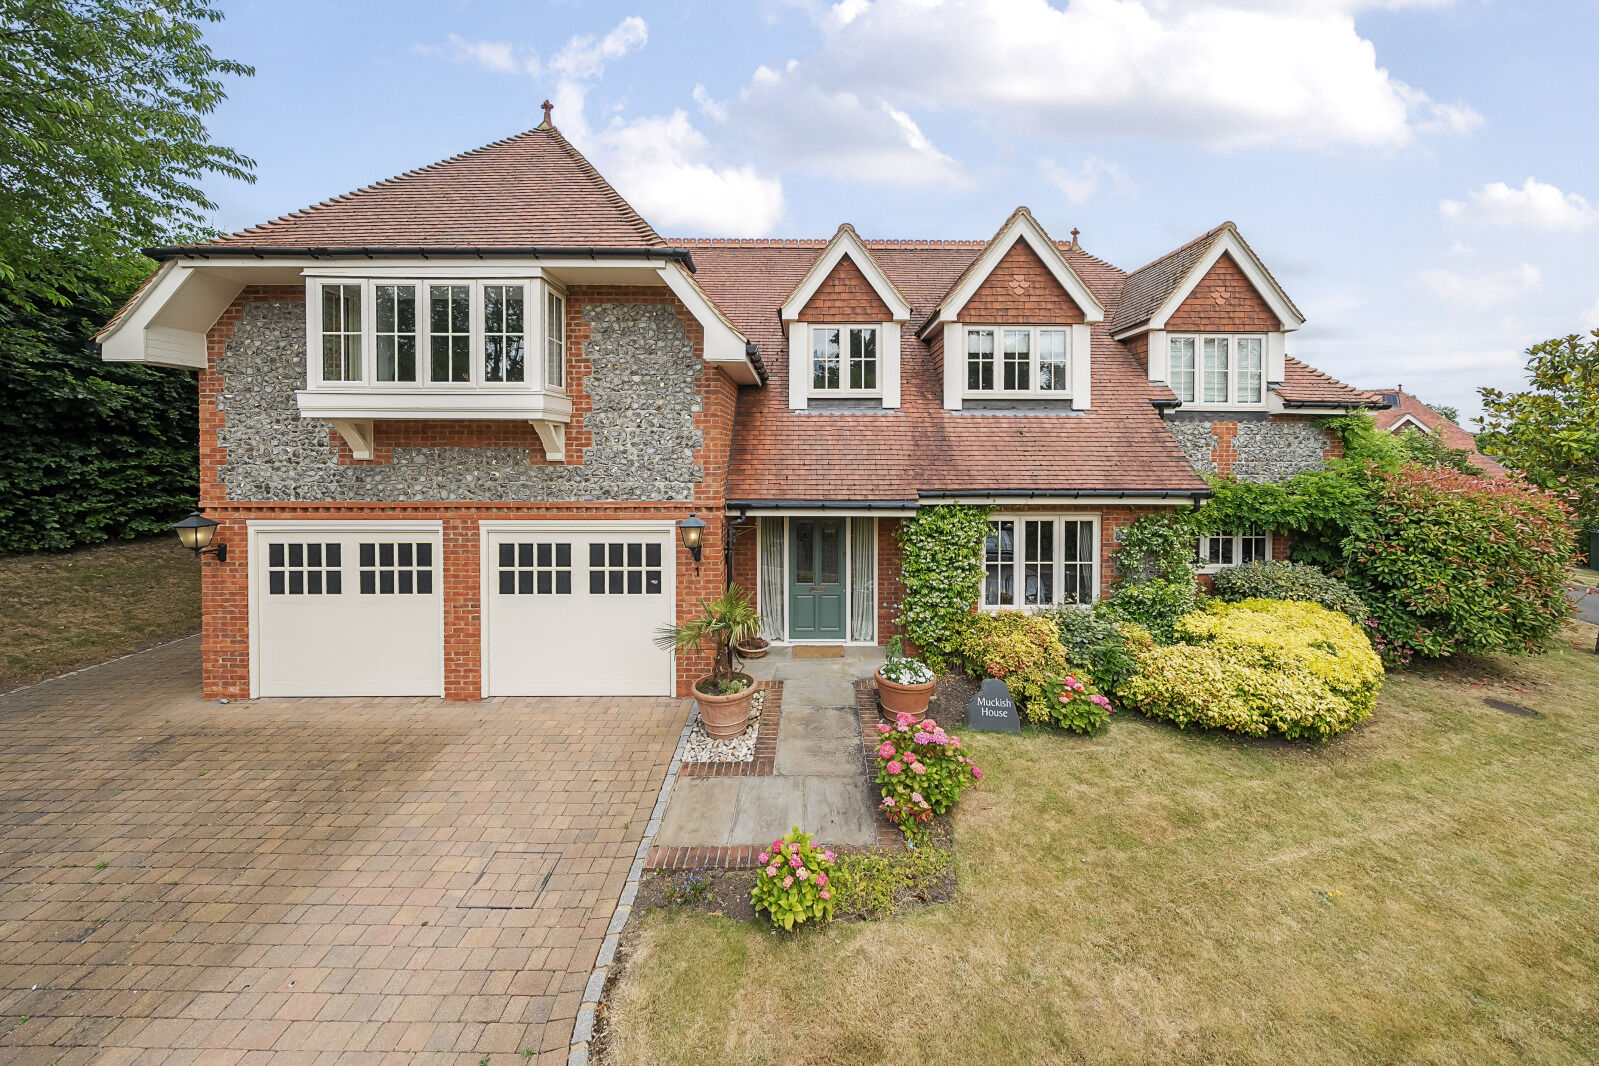 5 bedroom detached house for sale Rosemead, Reading, RG10, main image